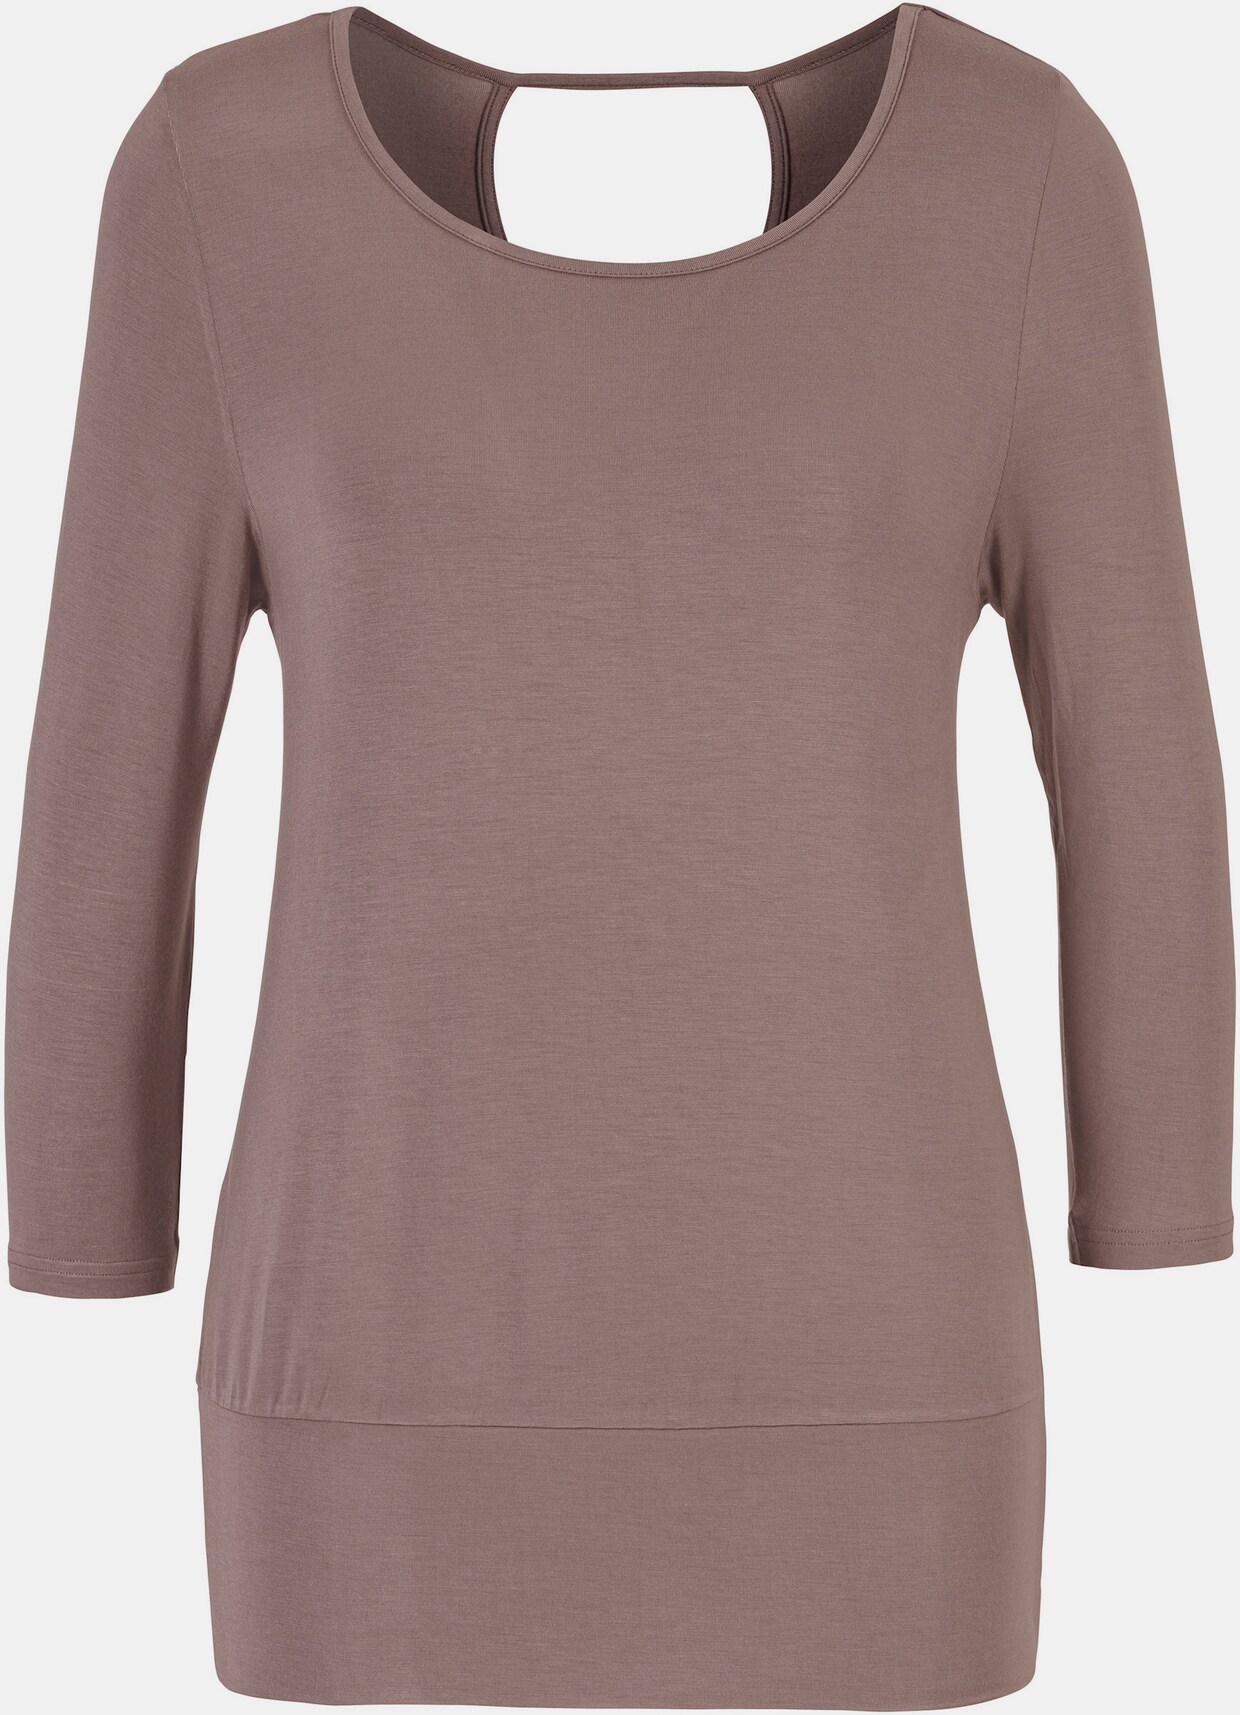 LASCANA 3/4-Arm-Shirt - taupe-solid